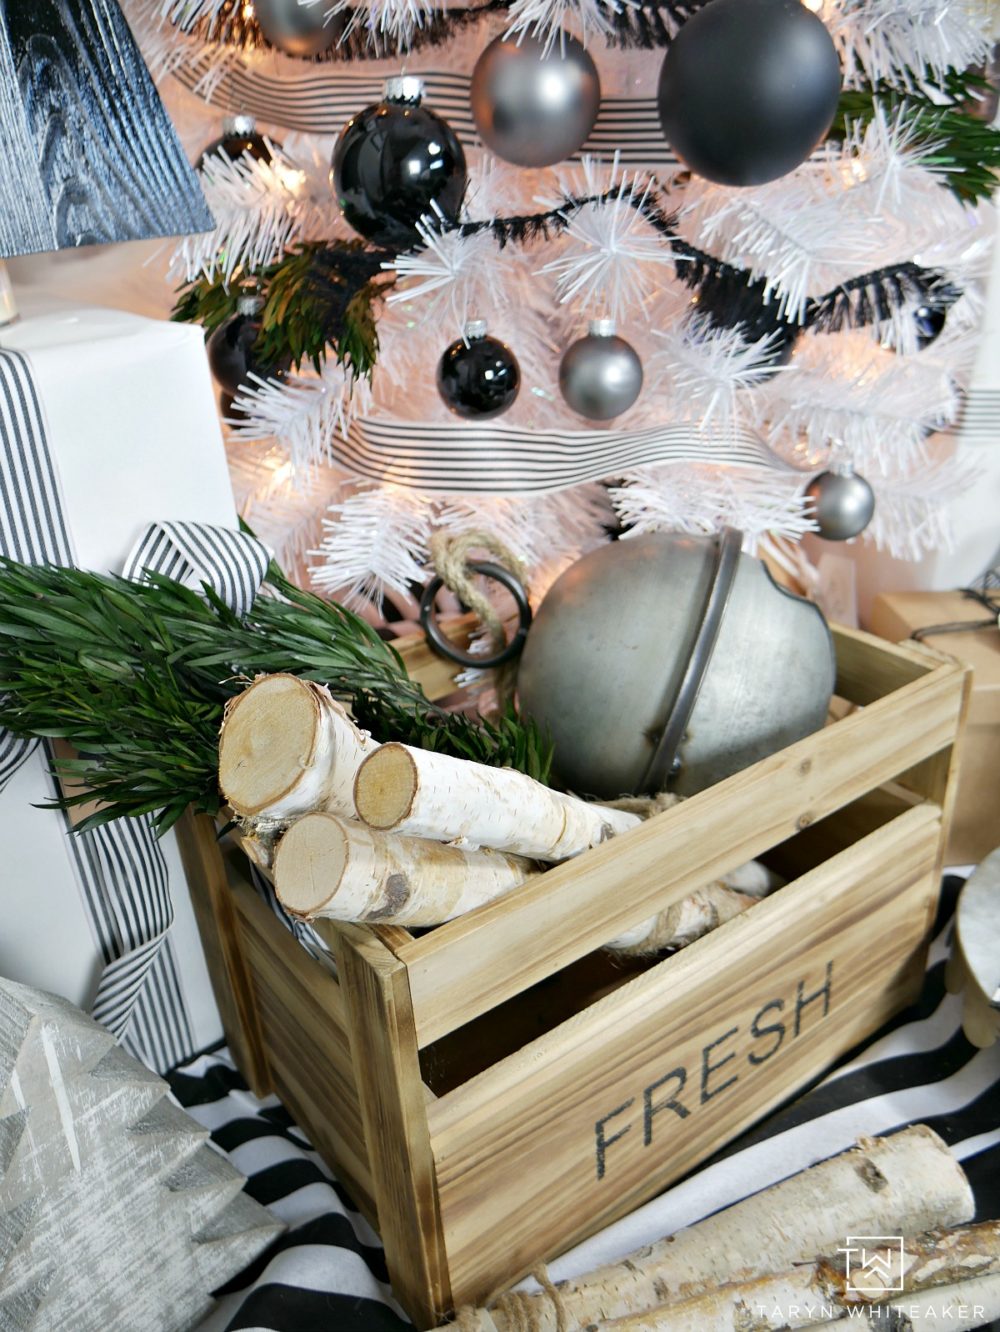 Taryn creates this Modern Black and White Christmas Tree display in her home using a tall white skinny tree with black and silver ornaments and wood!